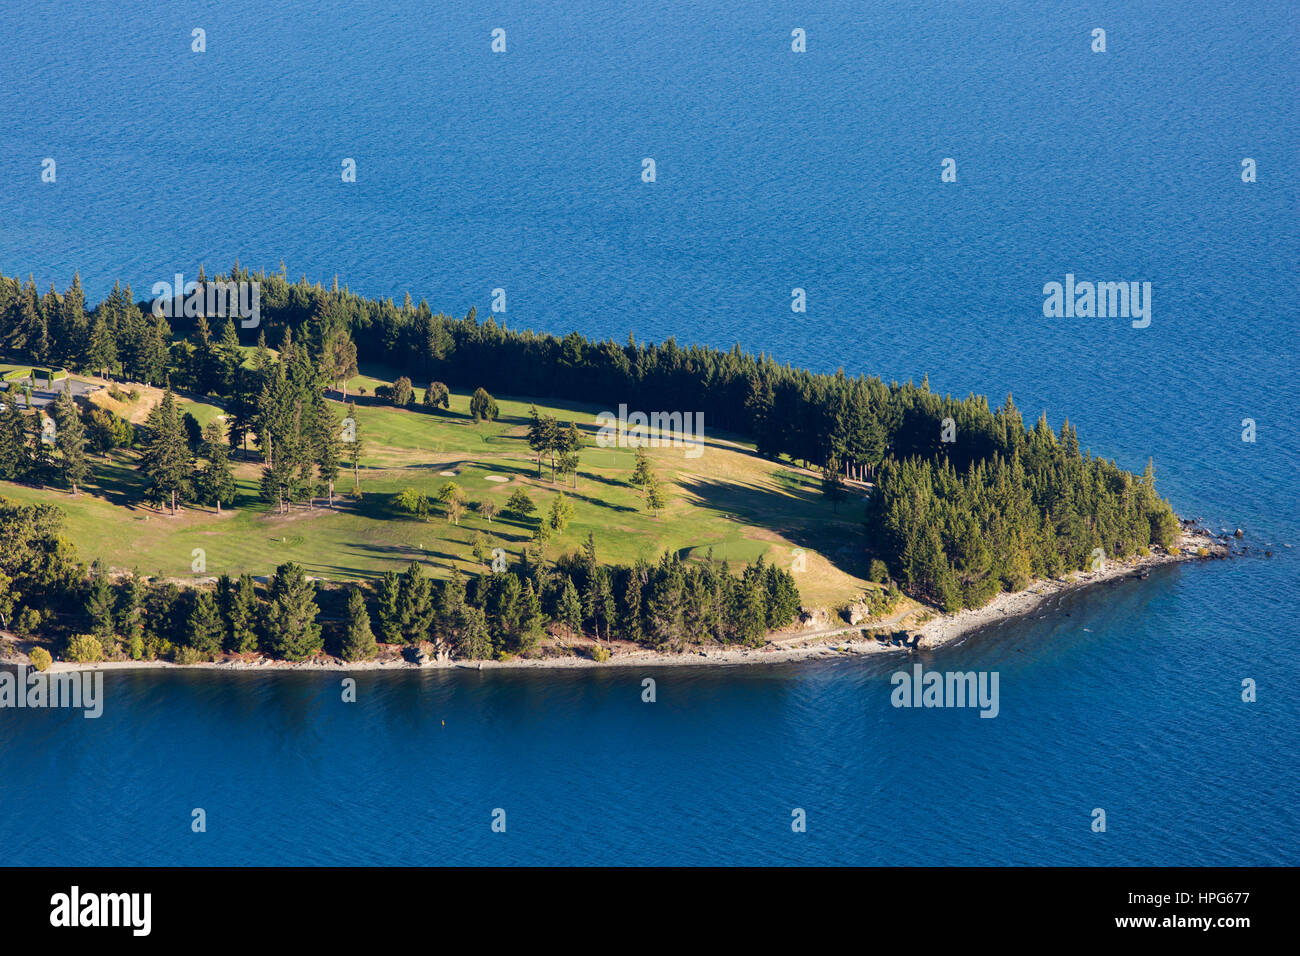 hi-res wooded - headland Picturesque and photography stock images Alamy